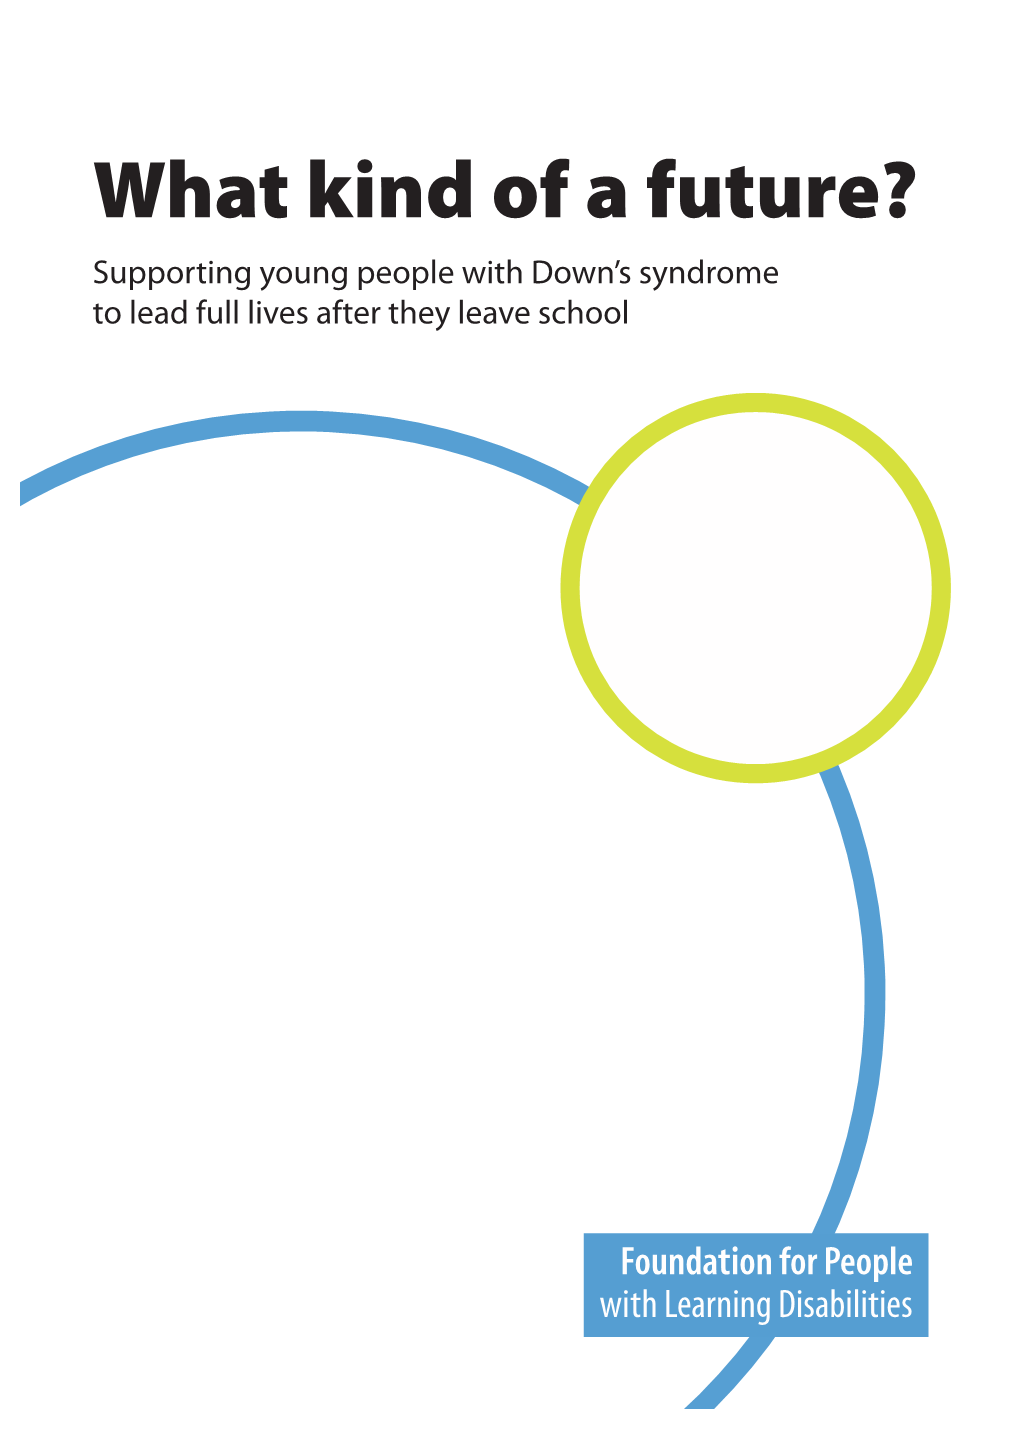 What Kind of a Future? Supporting Young People with Down's Syndrome to Lead Full Lives After